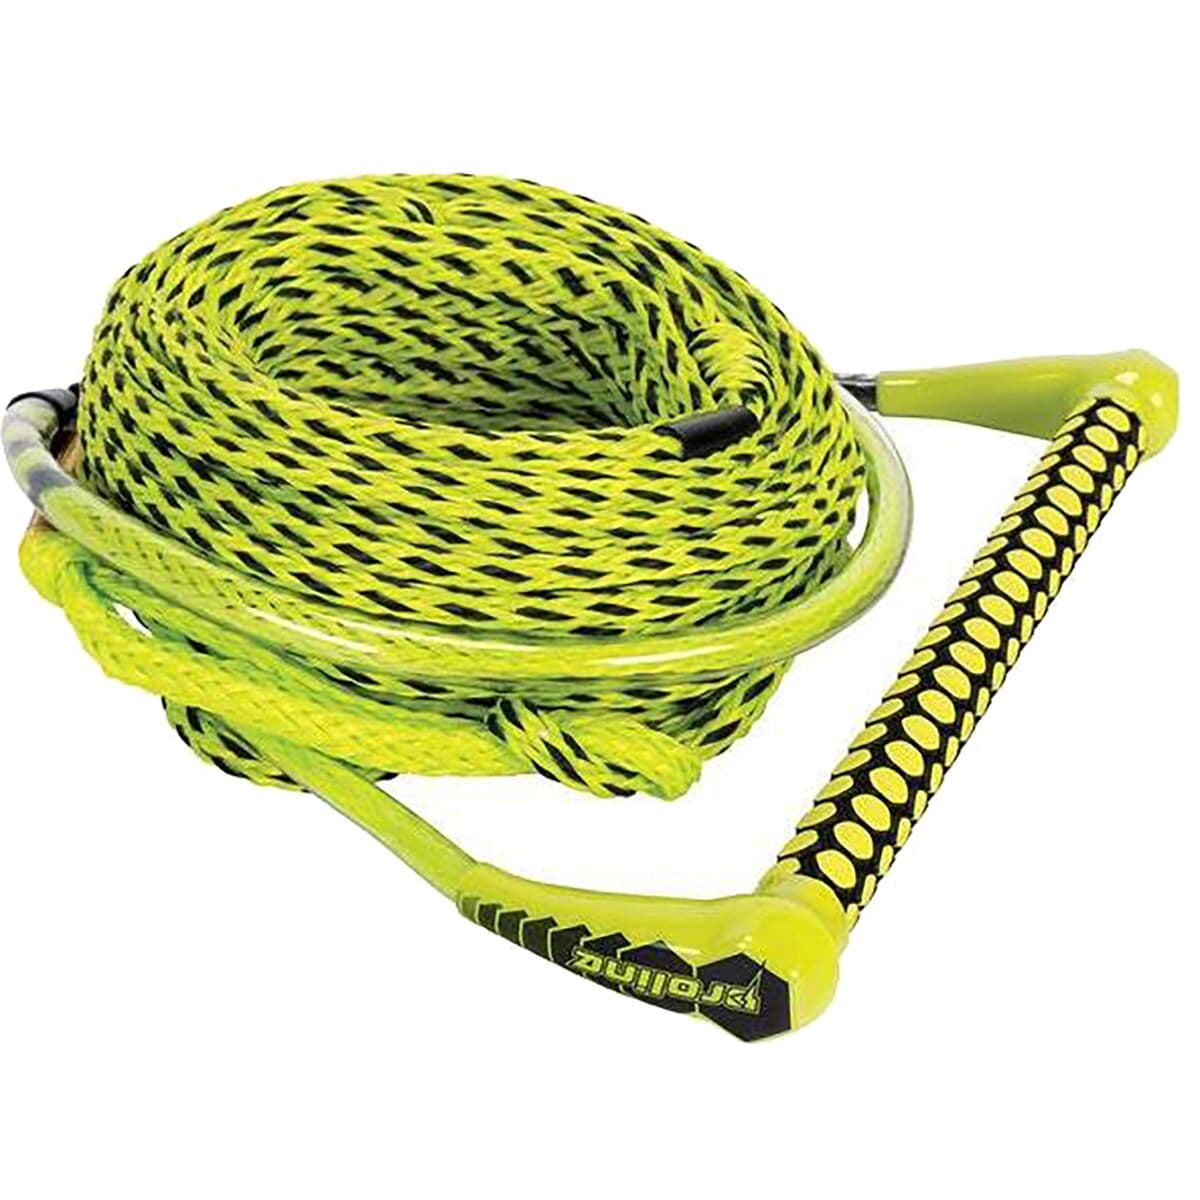 Connelly Skis Wake, Knee, & Ski Combo Tow Rope